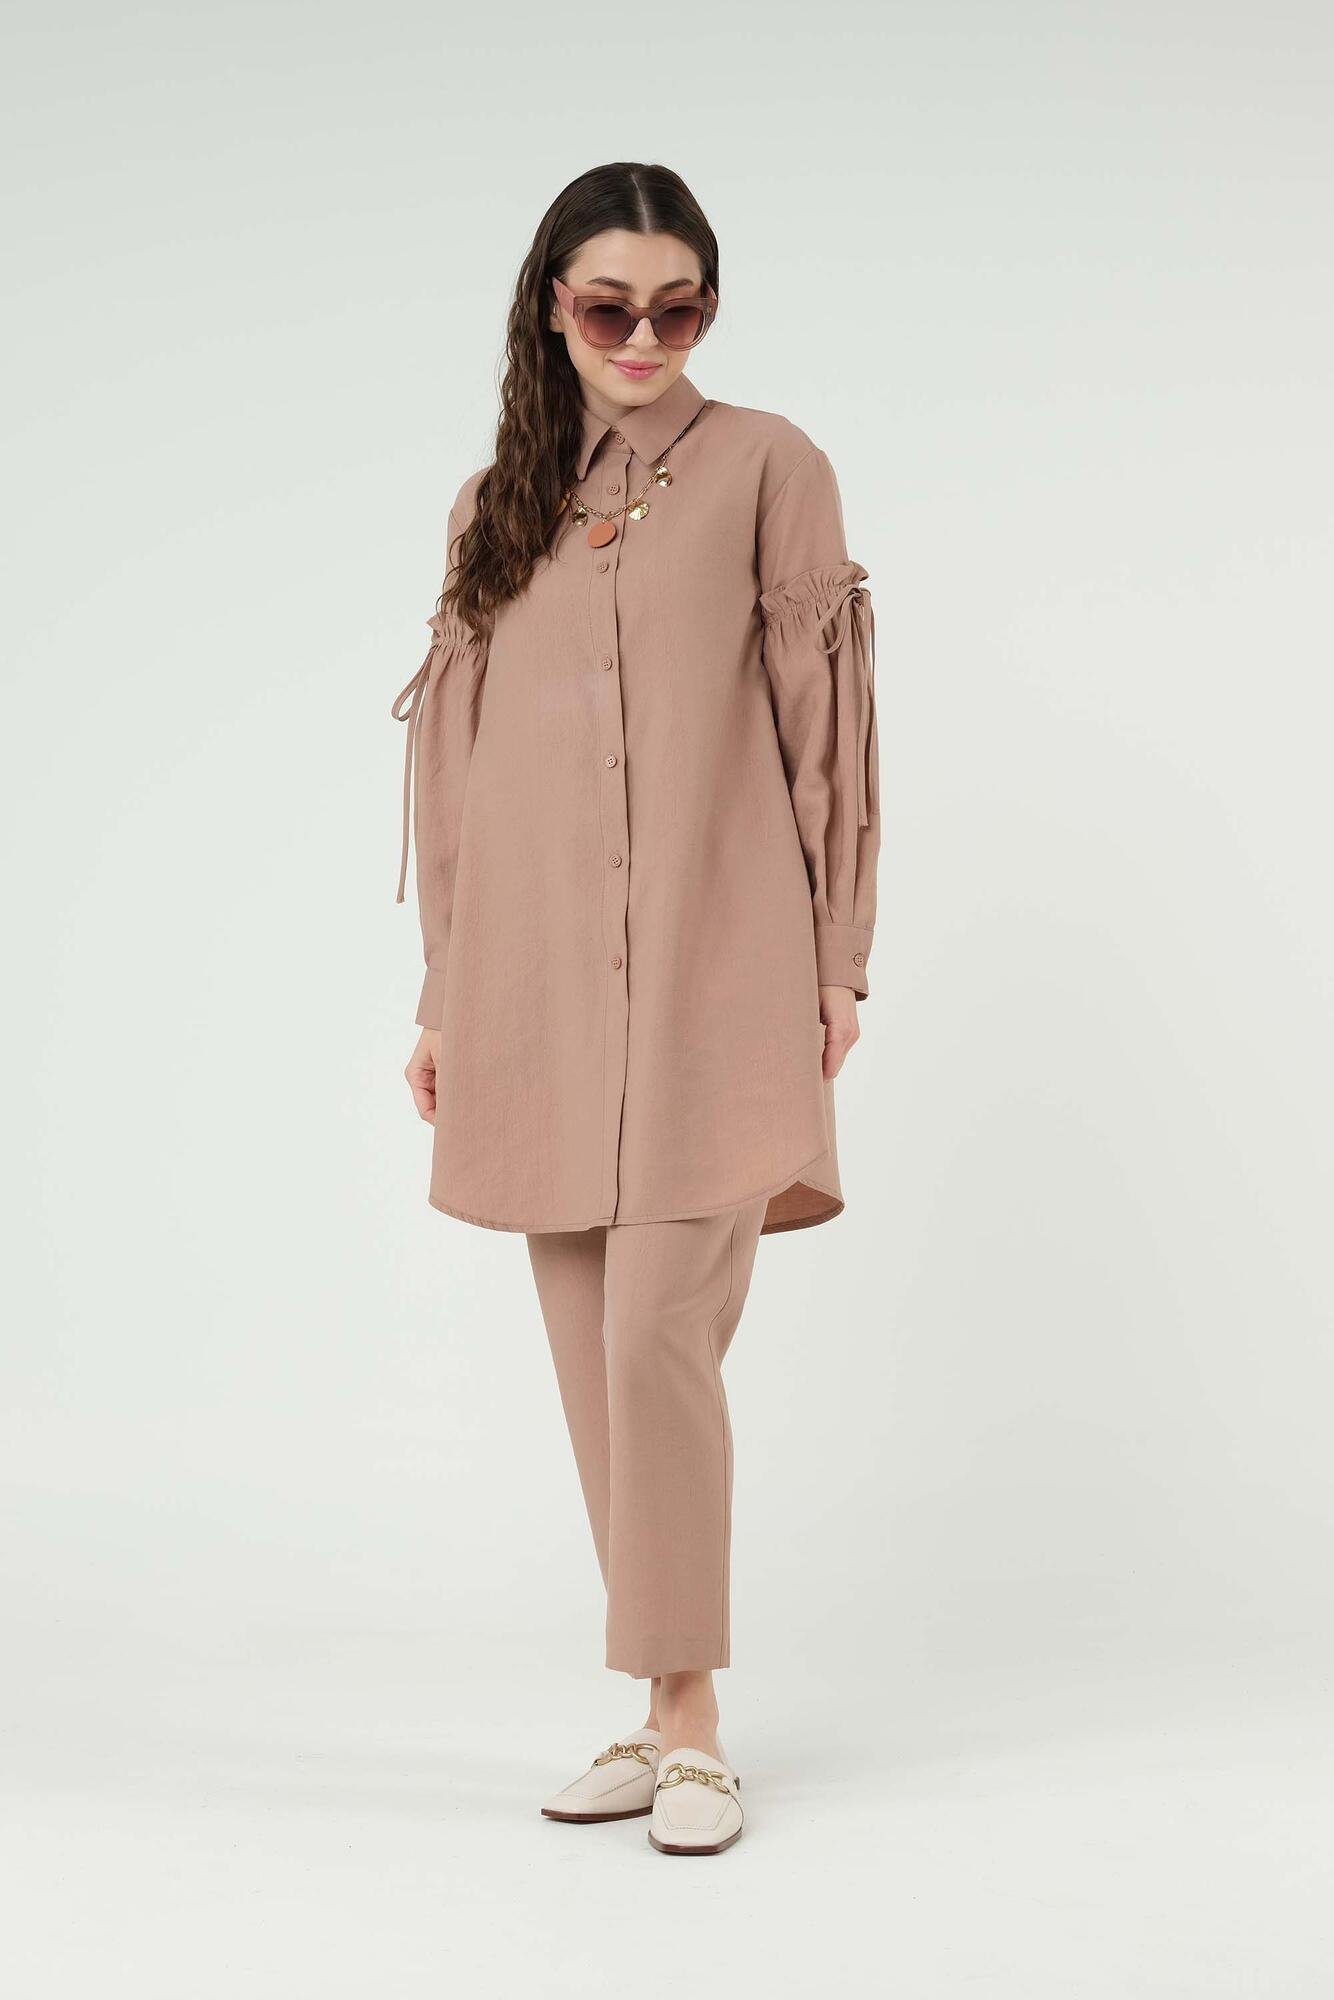 Strapped Arms Tunic Soft Powder Pink 